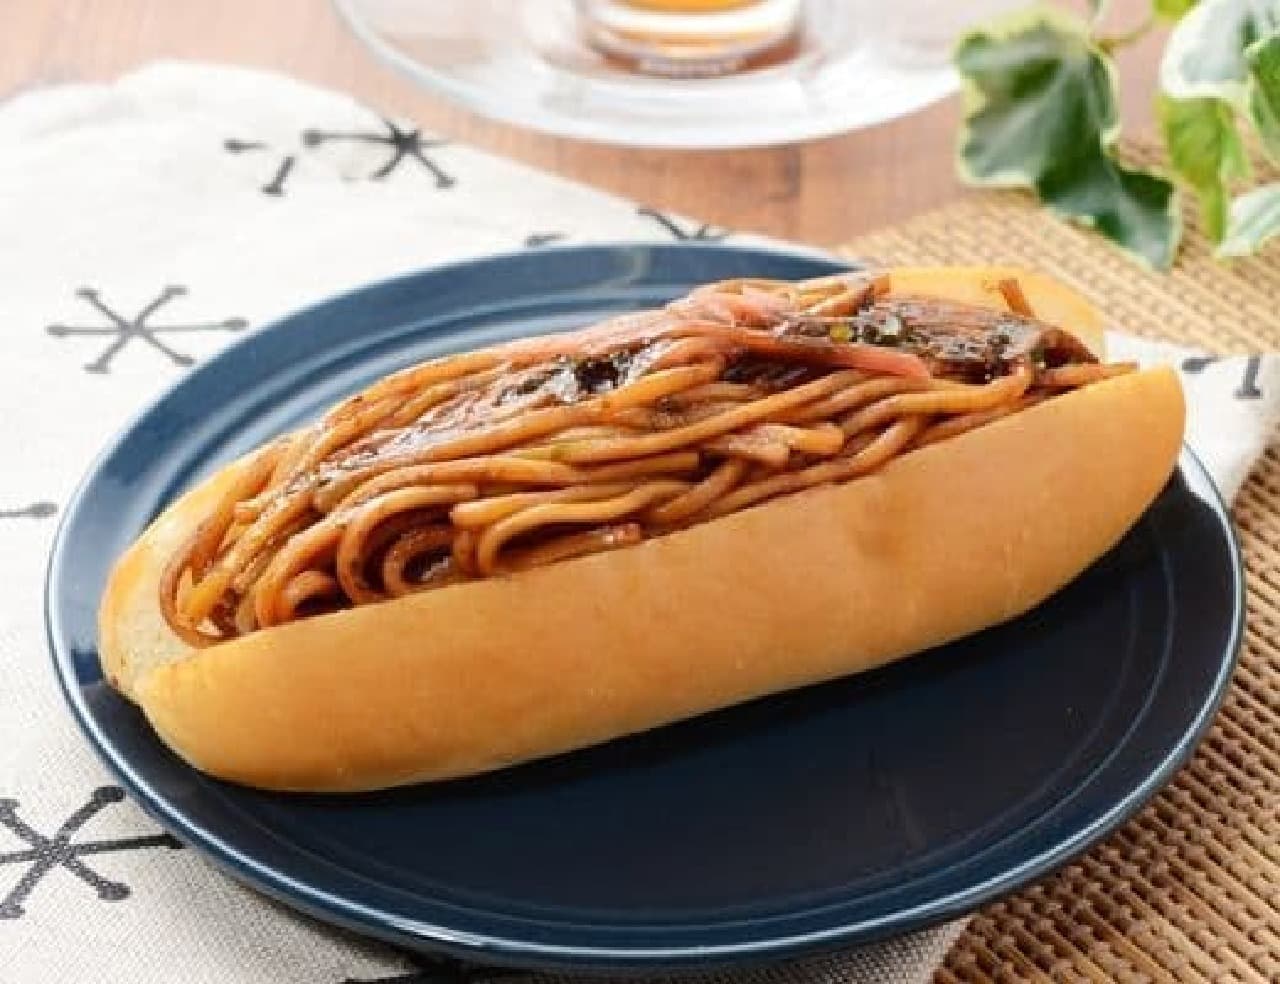 Lawson "Juicy Yakisoba Bread with Strong Sauce"